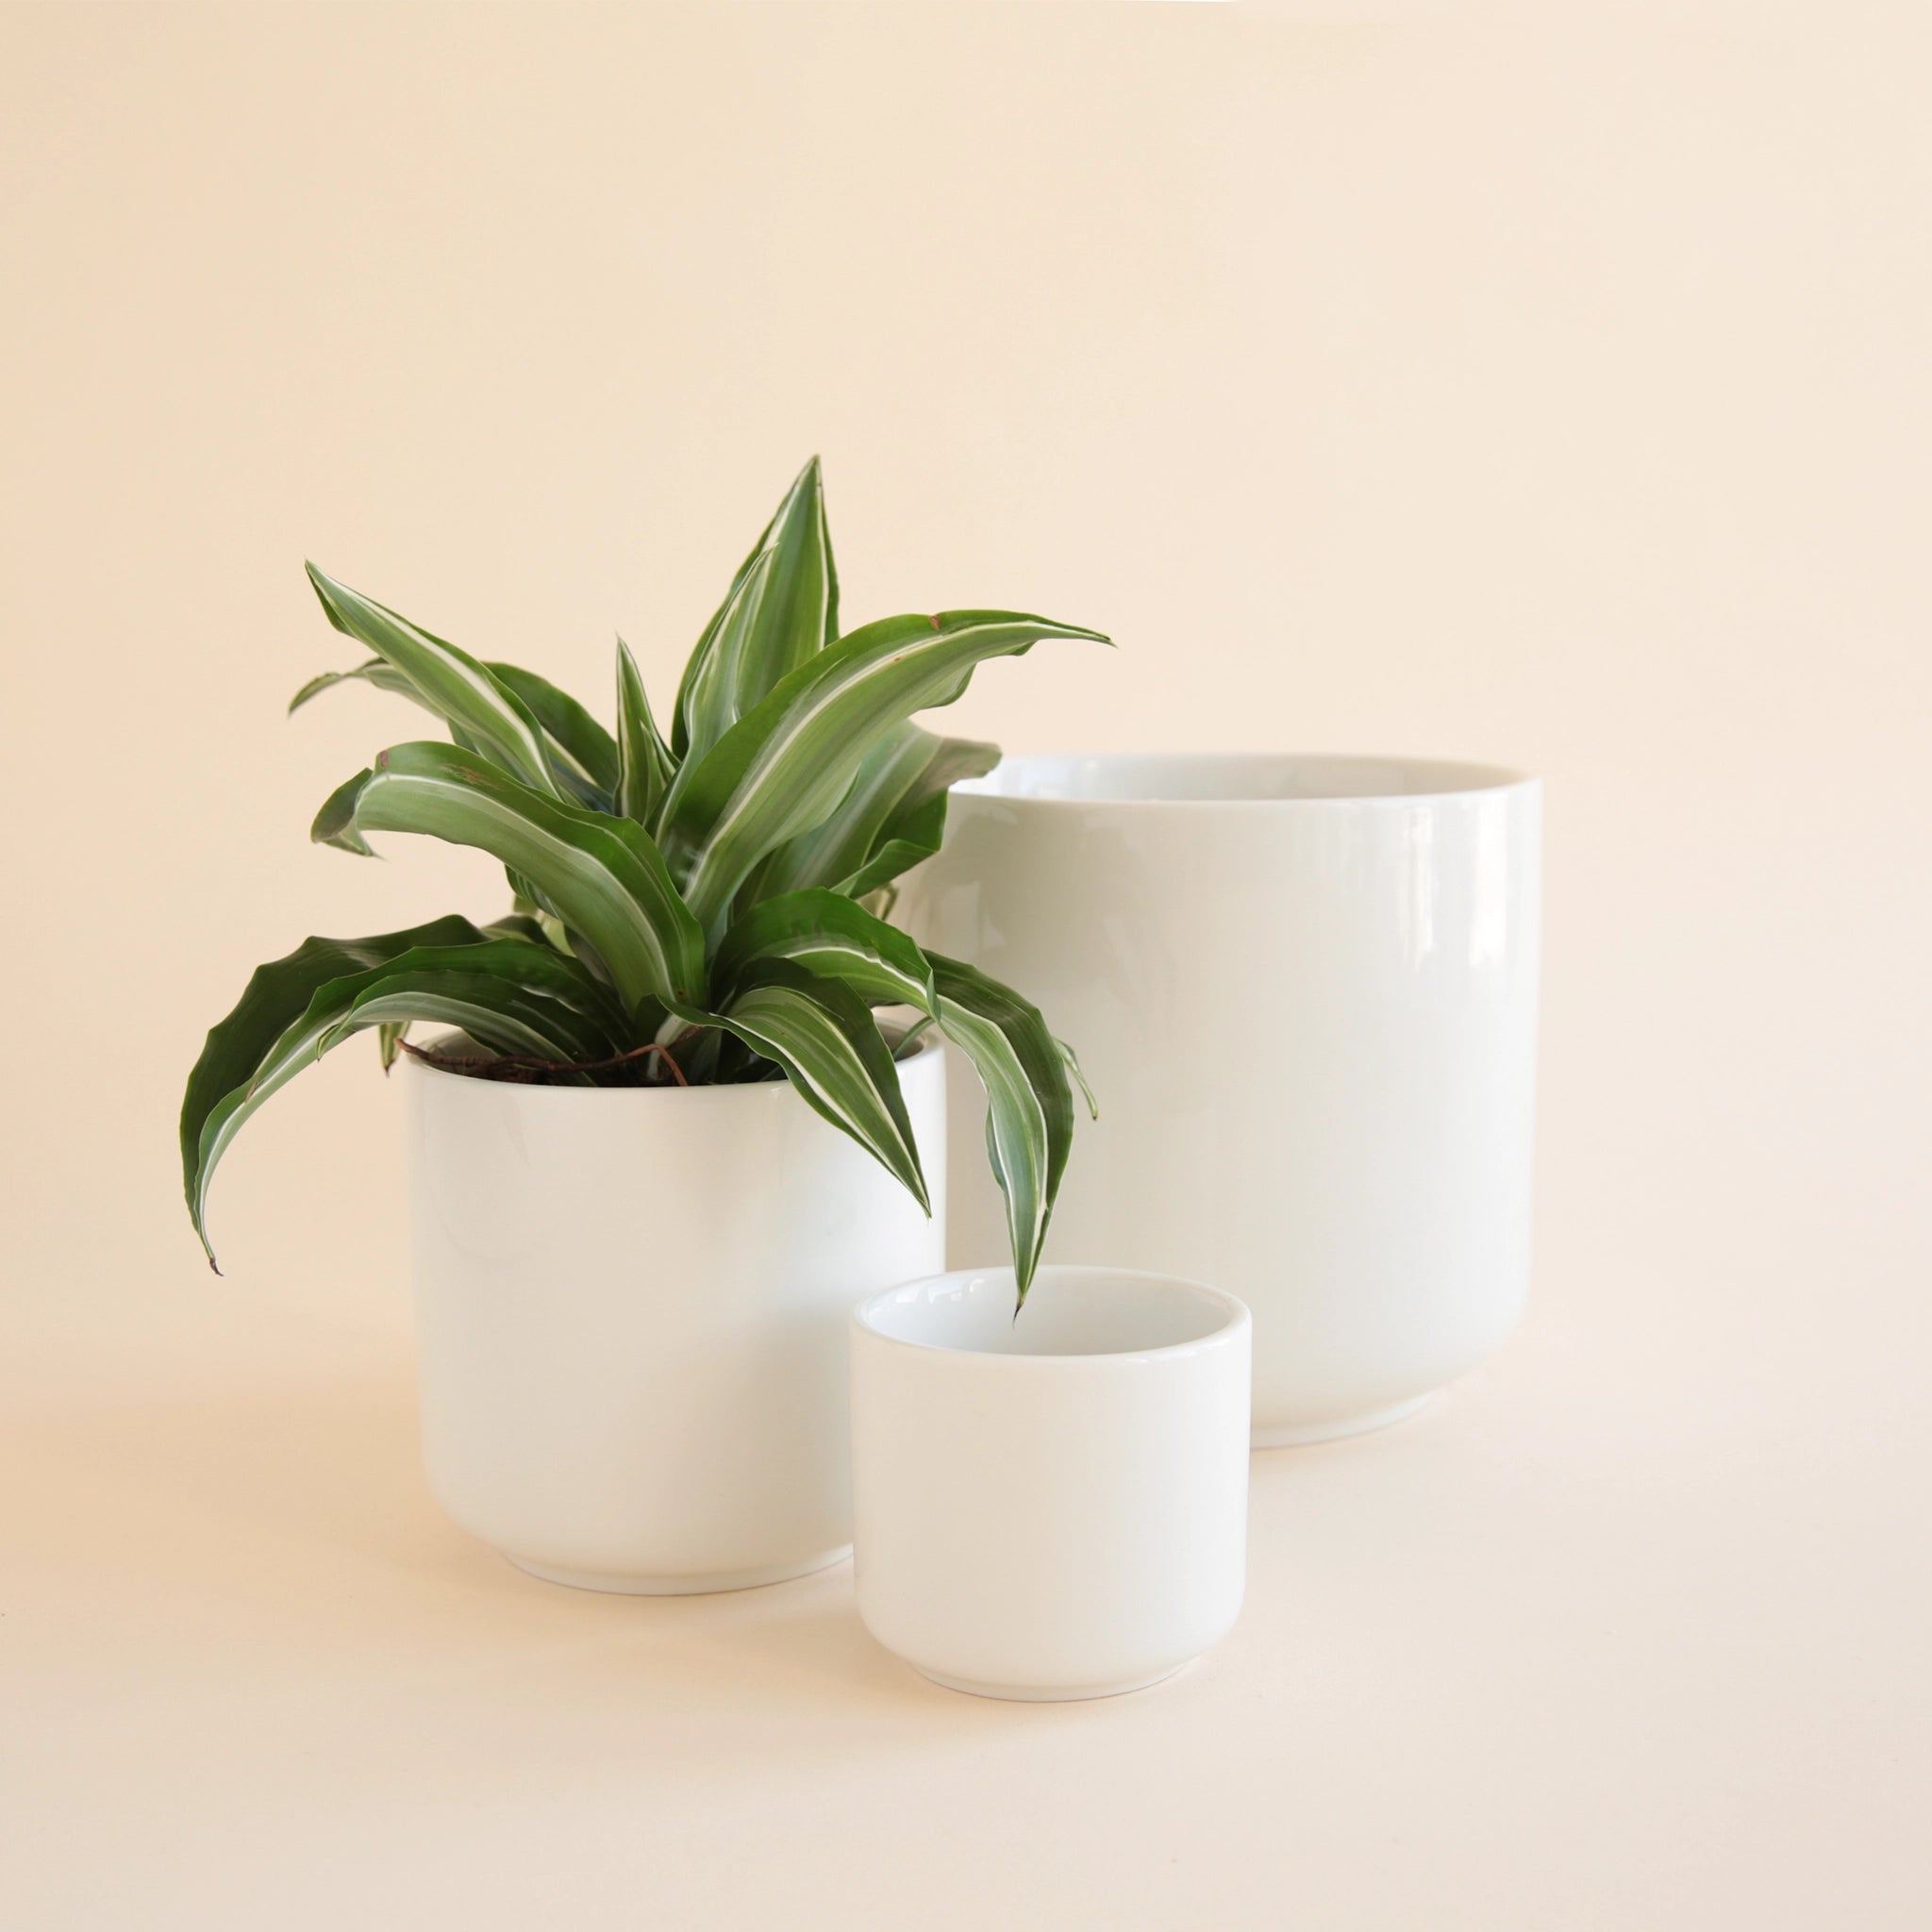 On a tan background is three different sized white ceramic planters with a glossy finish. 